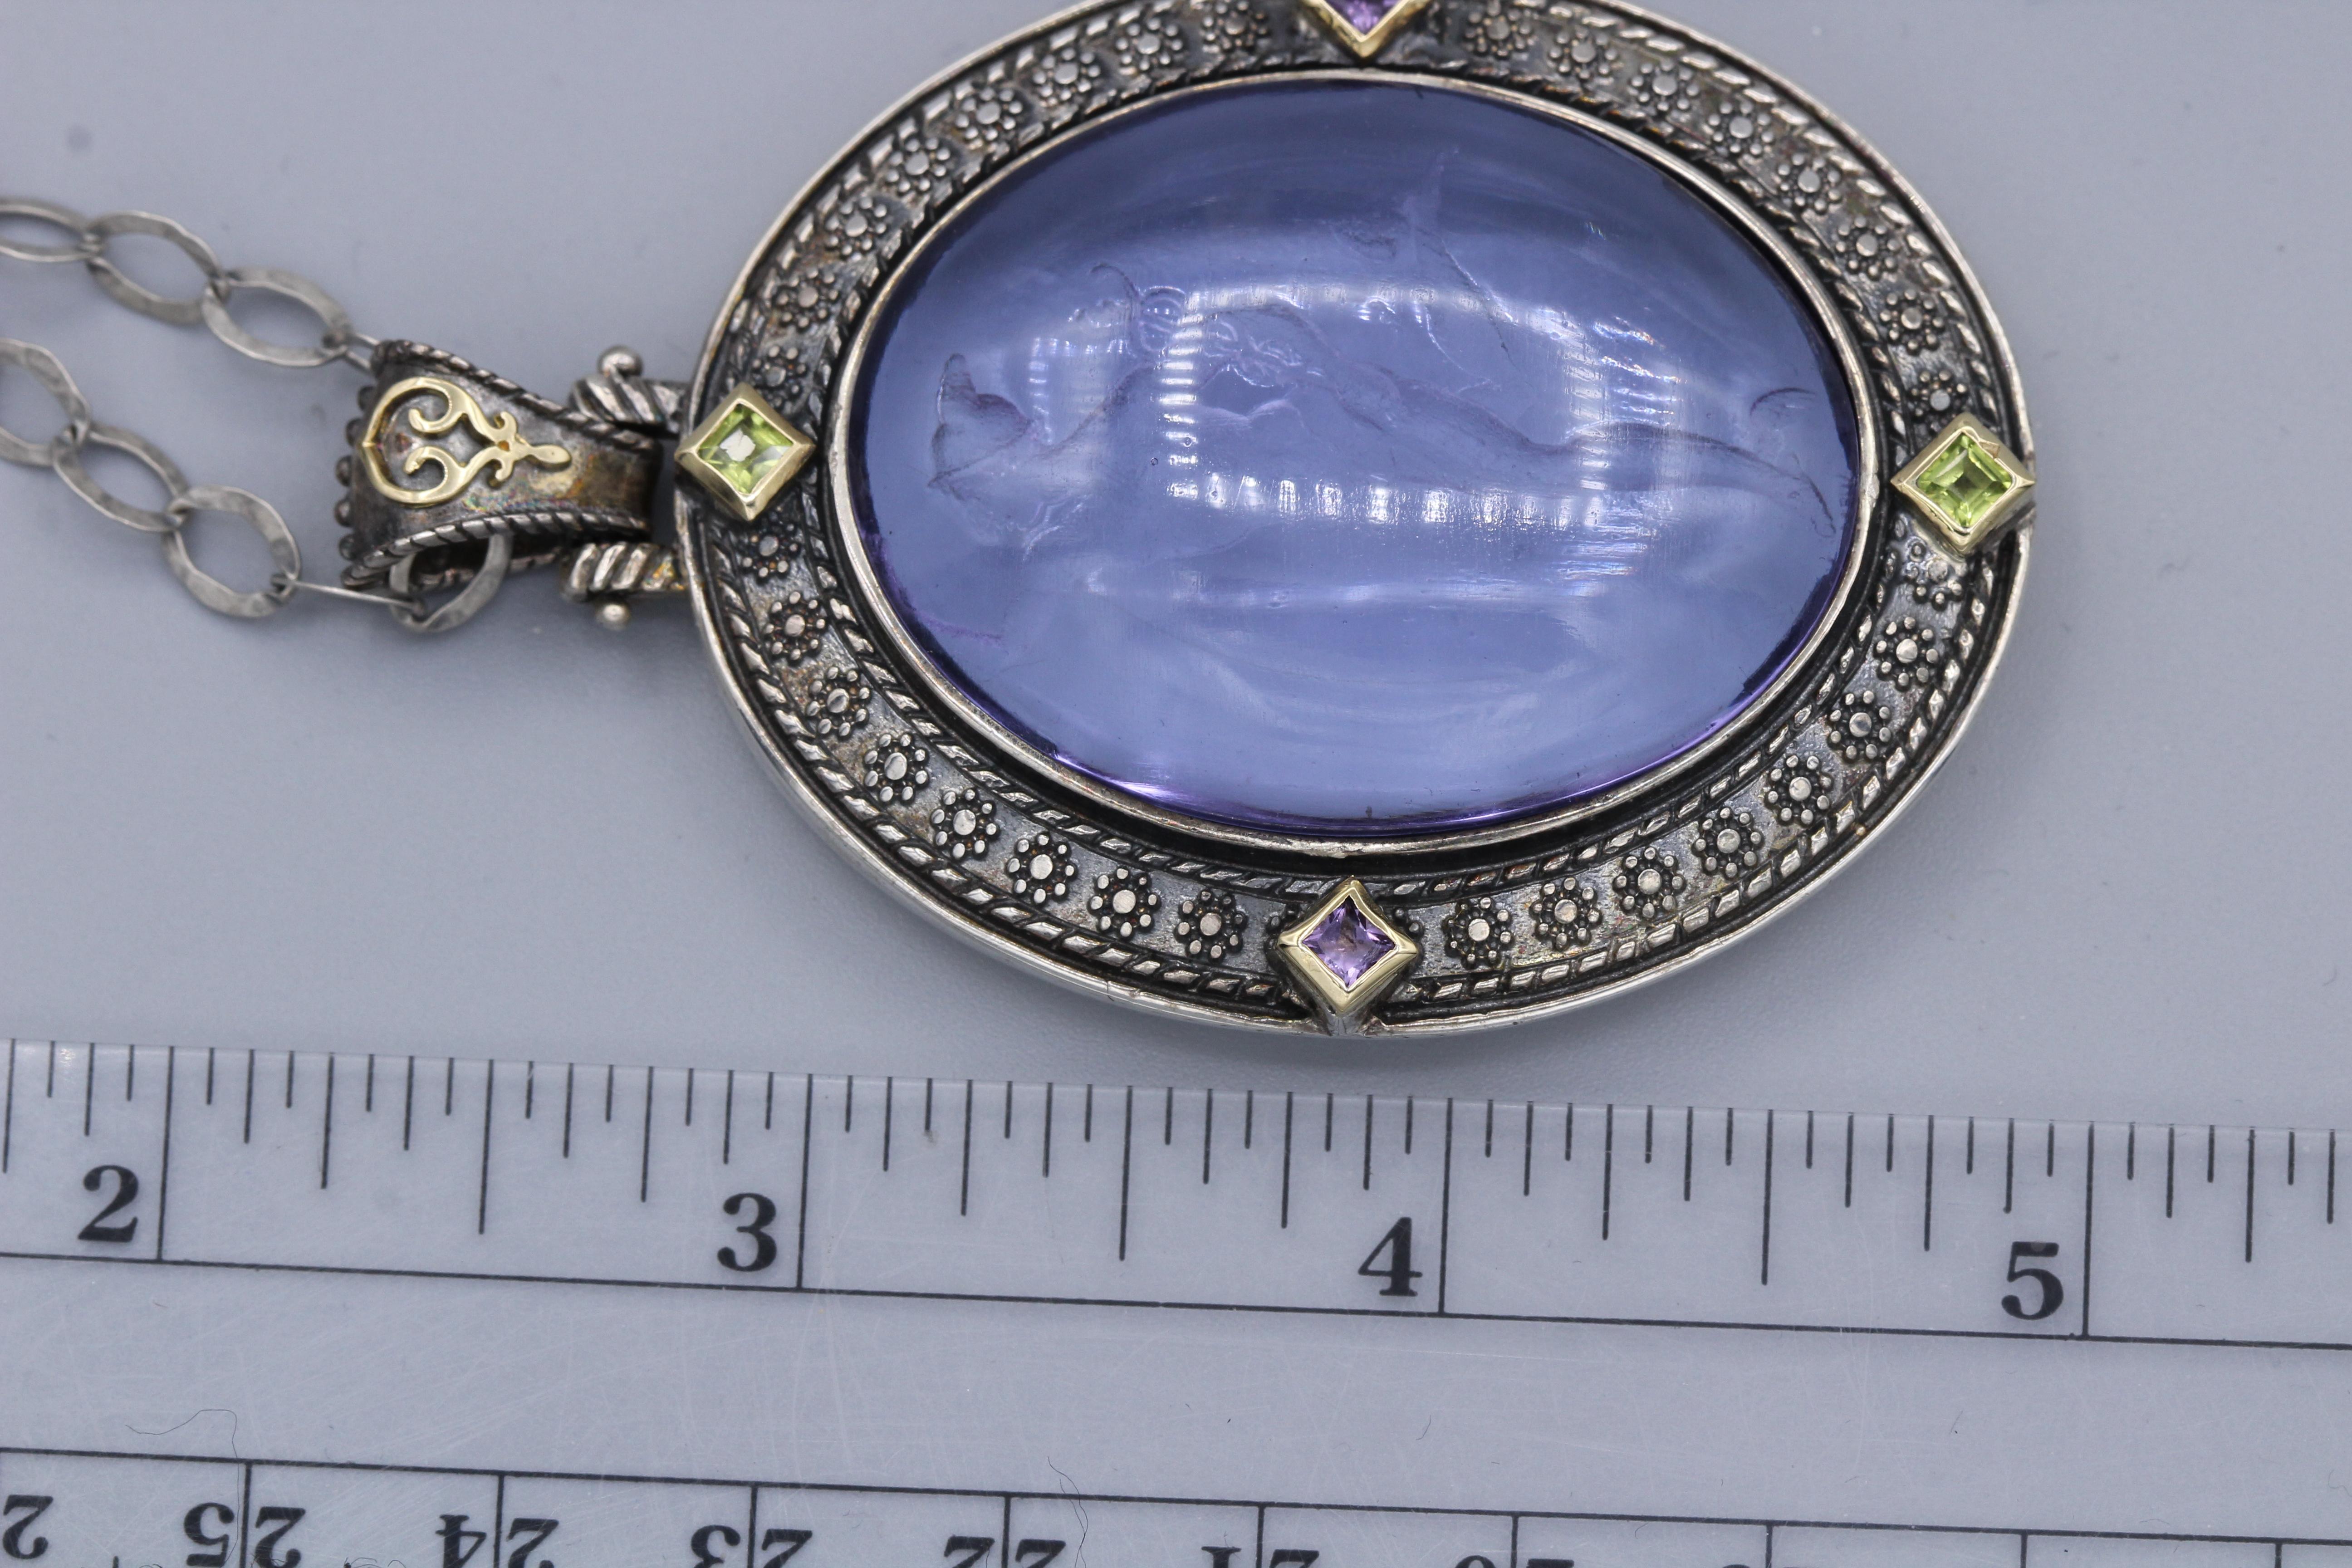 Venetian Purple Murano Glass Antique / Gothic Style Pendant
Image of Ermes - the messanger of Gods fortunes wealth & athletes
Sterling Silver 925, 48 Grams, 
with small natural Amethyst & Peridot stones,
set with 18K Yellow Gold Ornaments, 
Pendant